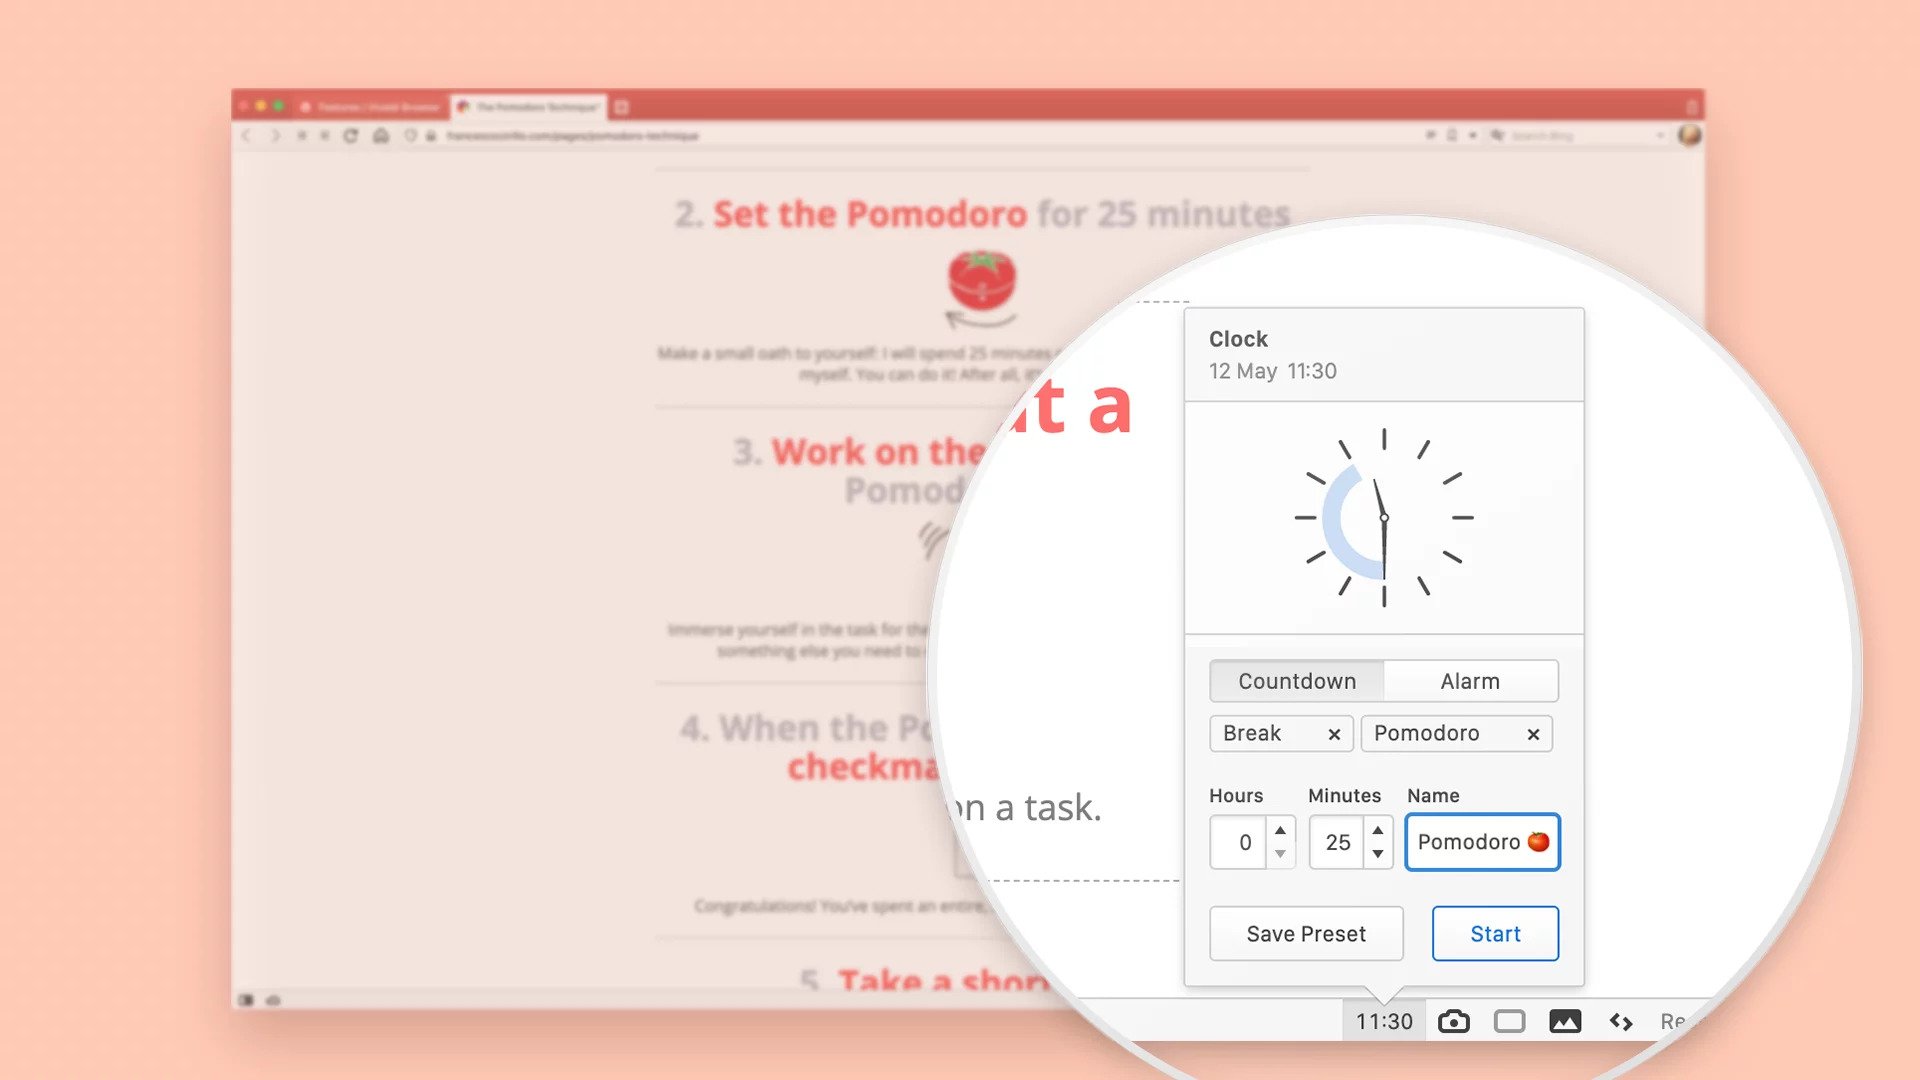 Vivaldi, T. The Pomodoro timer right in your browser. Vivaldi Browser. 2020, May 13.